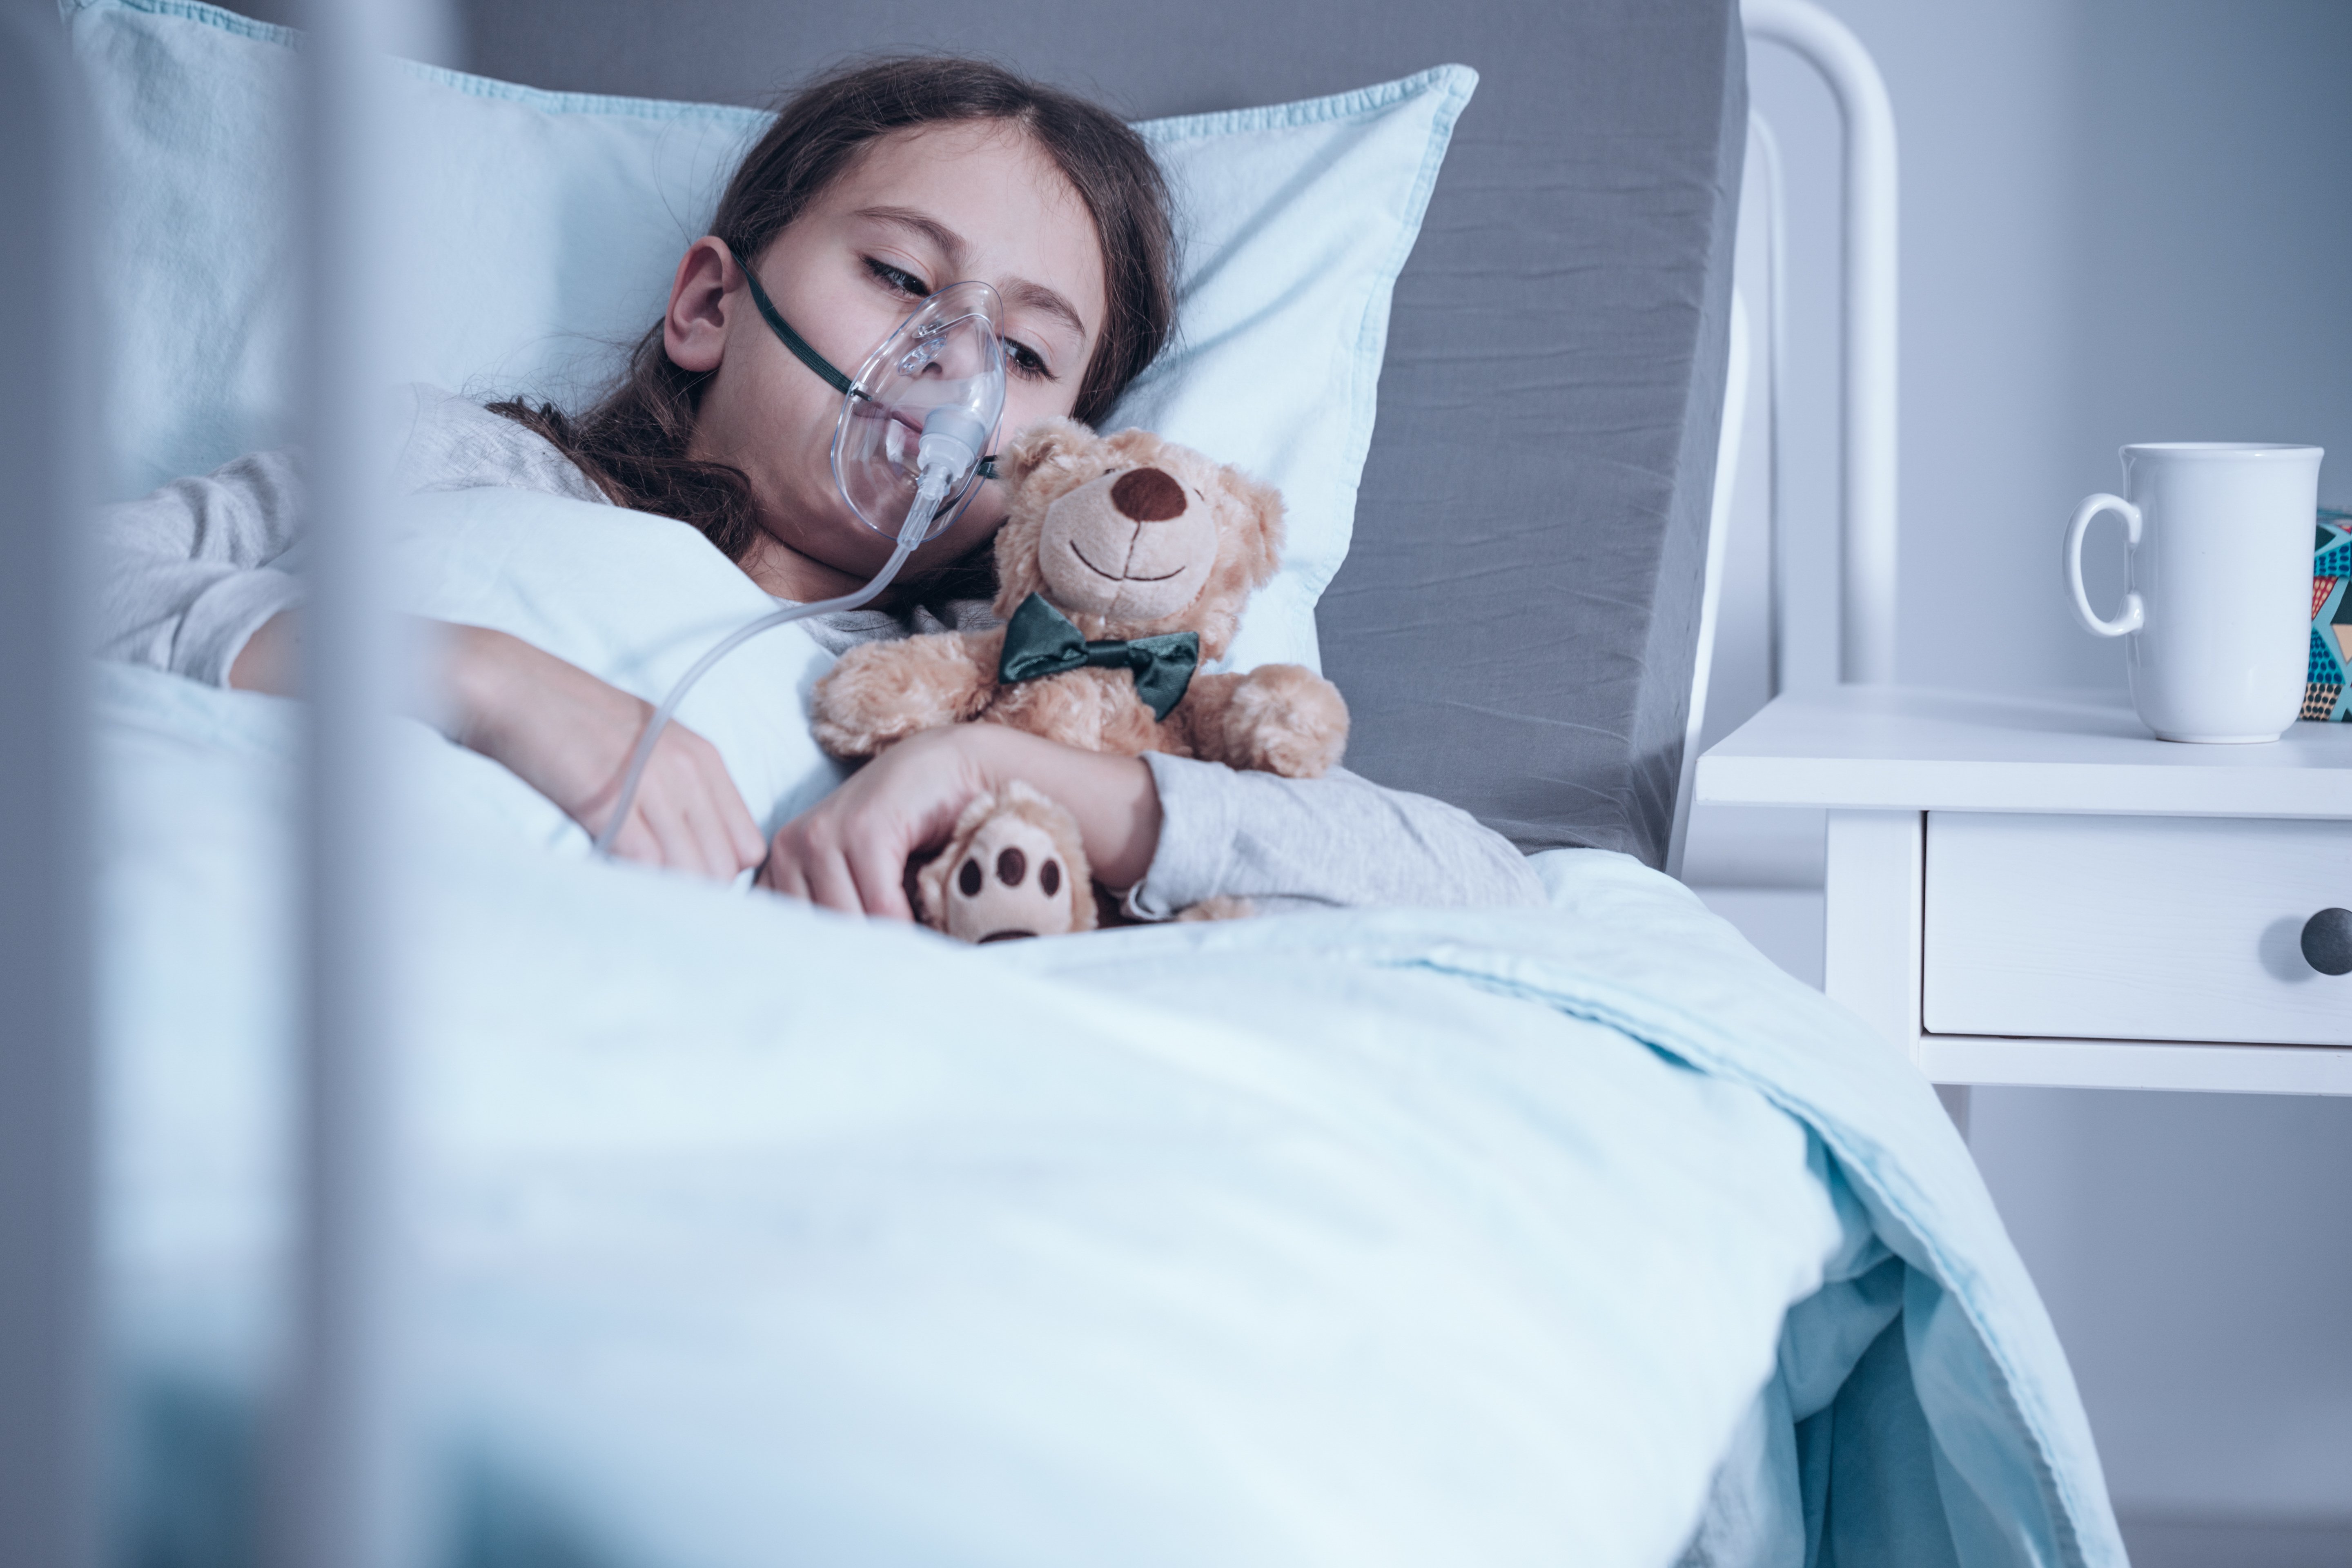 A sick little girl in hospital with her teddy bear. │Source: Shutterstock